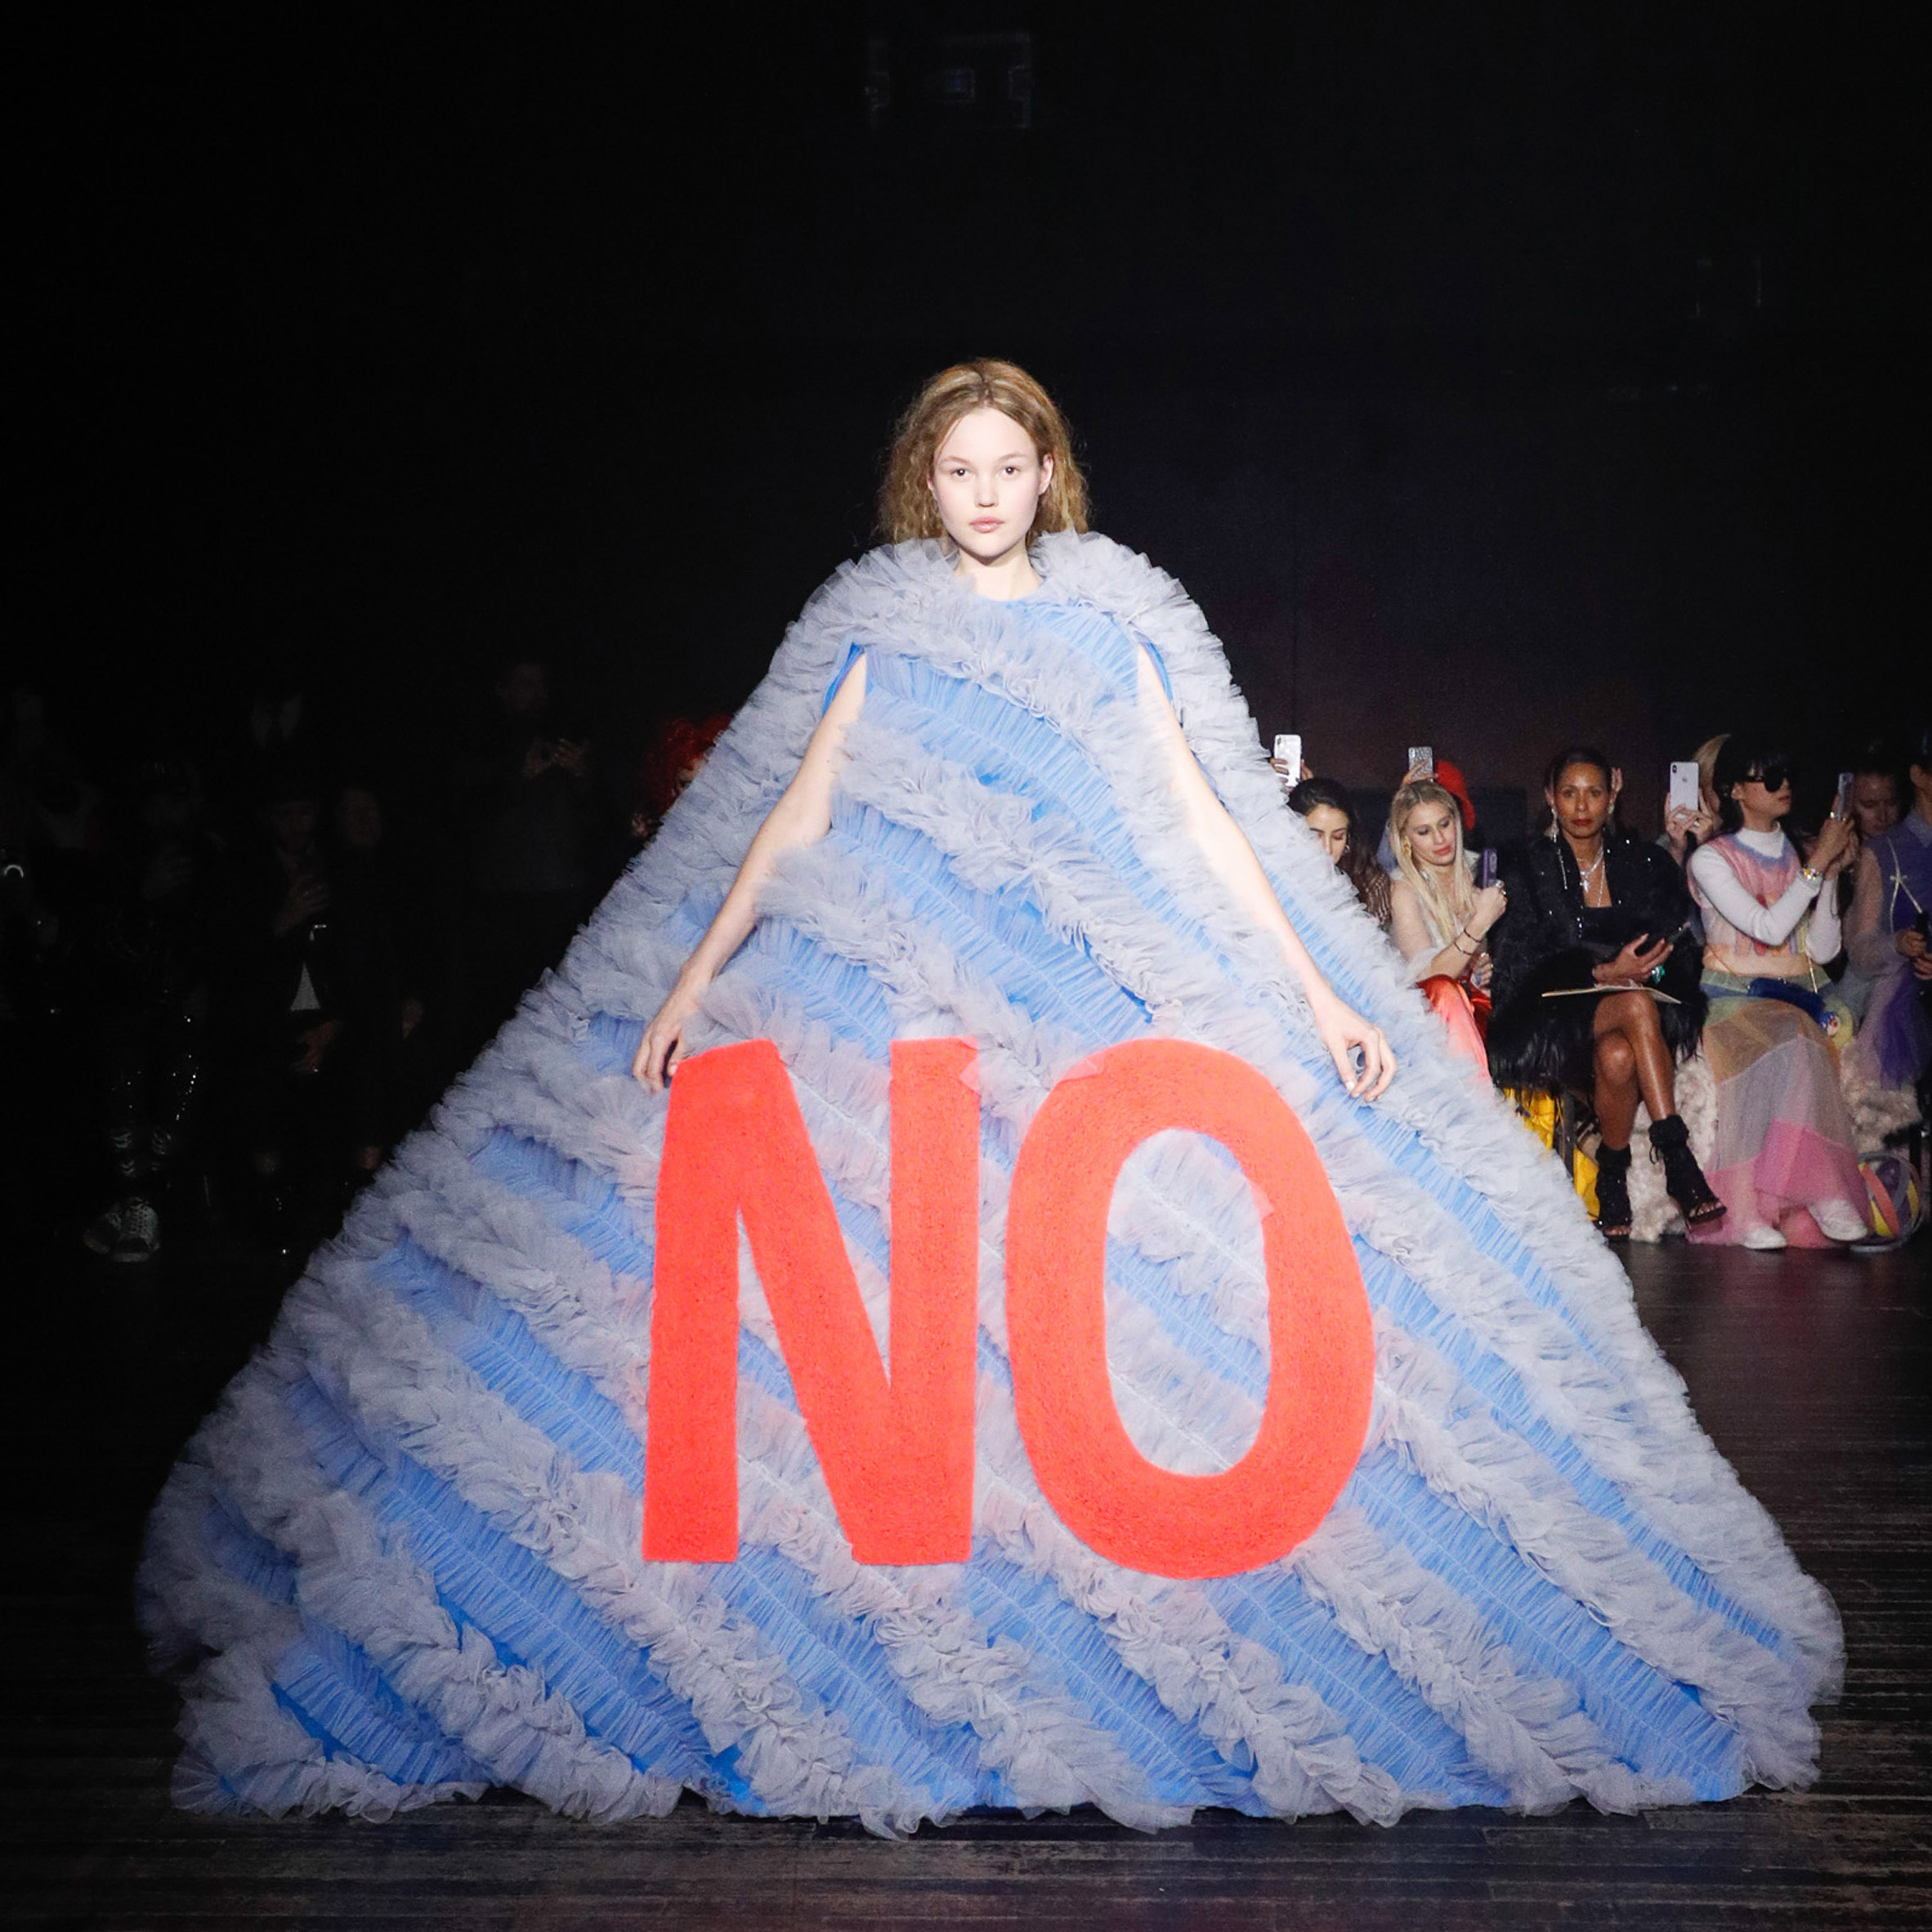 Viktor Rolf S Spring Summer 19 Couture Fashion Statements Collection Demonstrates The Expressive Power Of Clothing